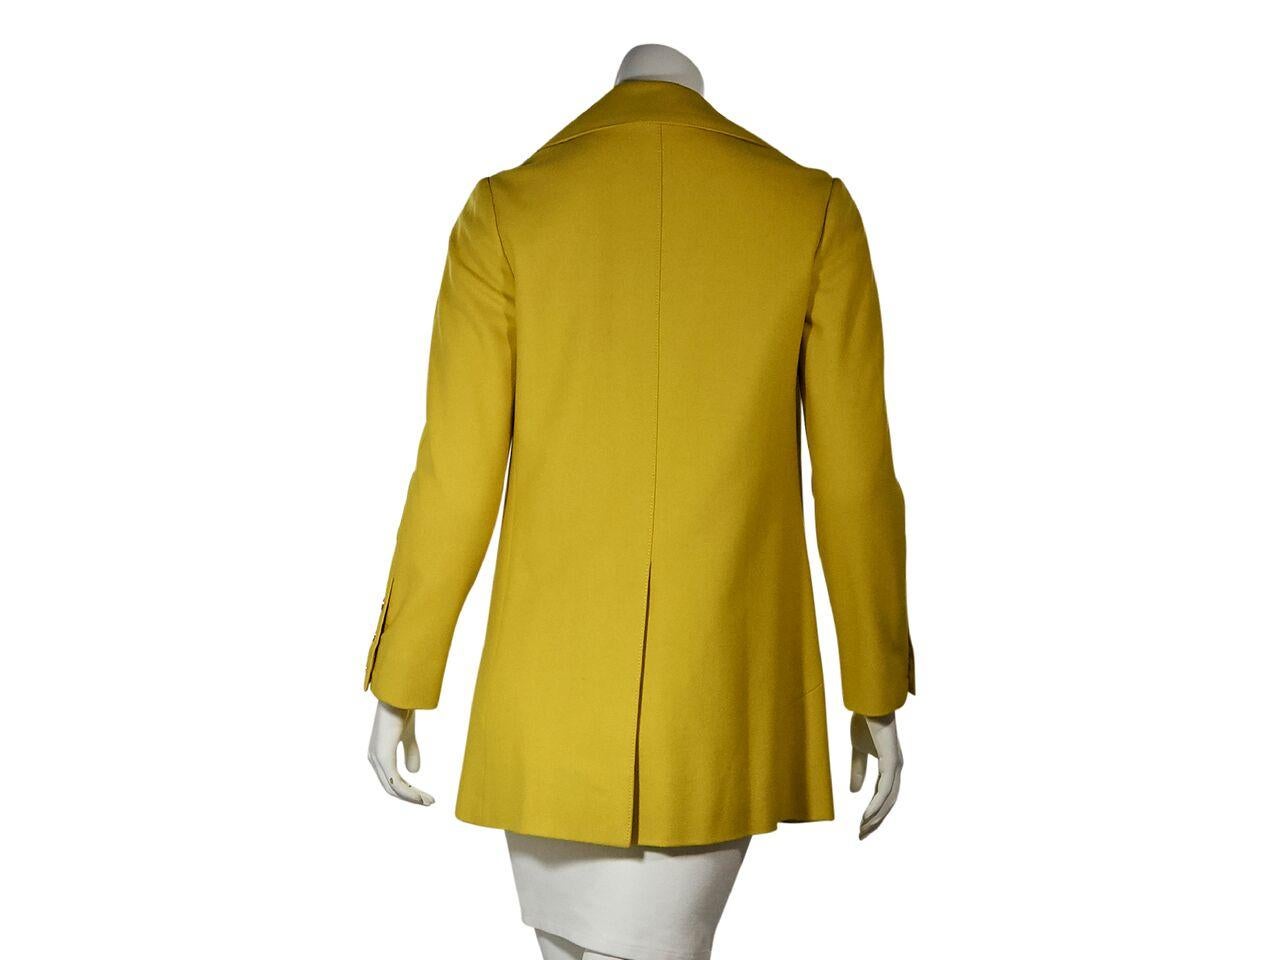 Product details:  Vintage yellow wool jacket by Hermes.  Oversized notched lapel.  Long sleeves.  Three-button detail at cuffs.  Button-front closure.  Front slide pockets.  Center back hem vent.  Goldtone hardware.  35.5